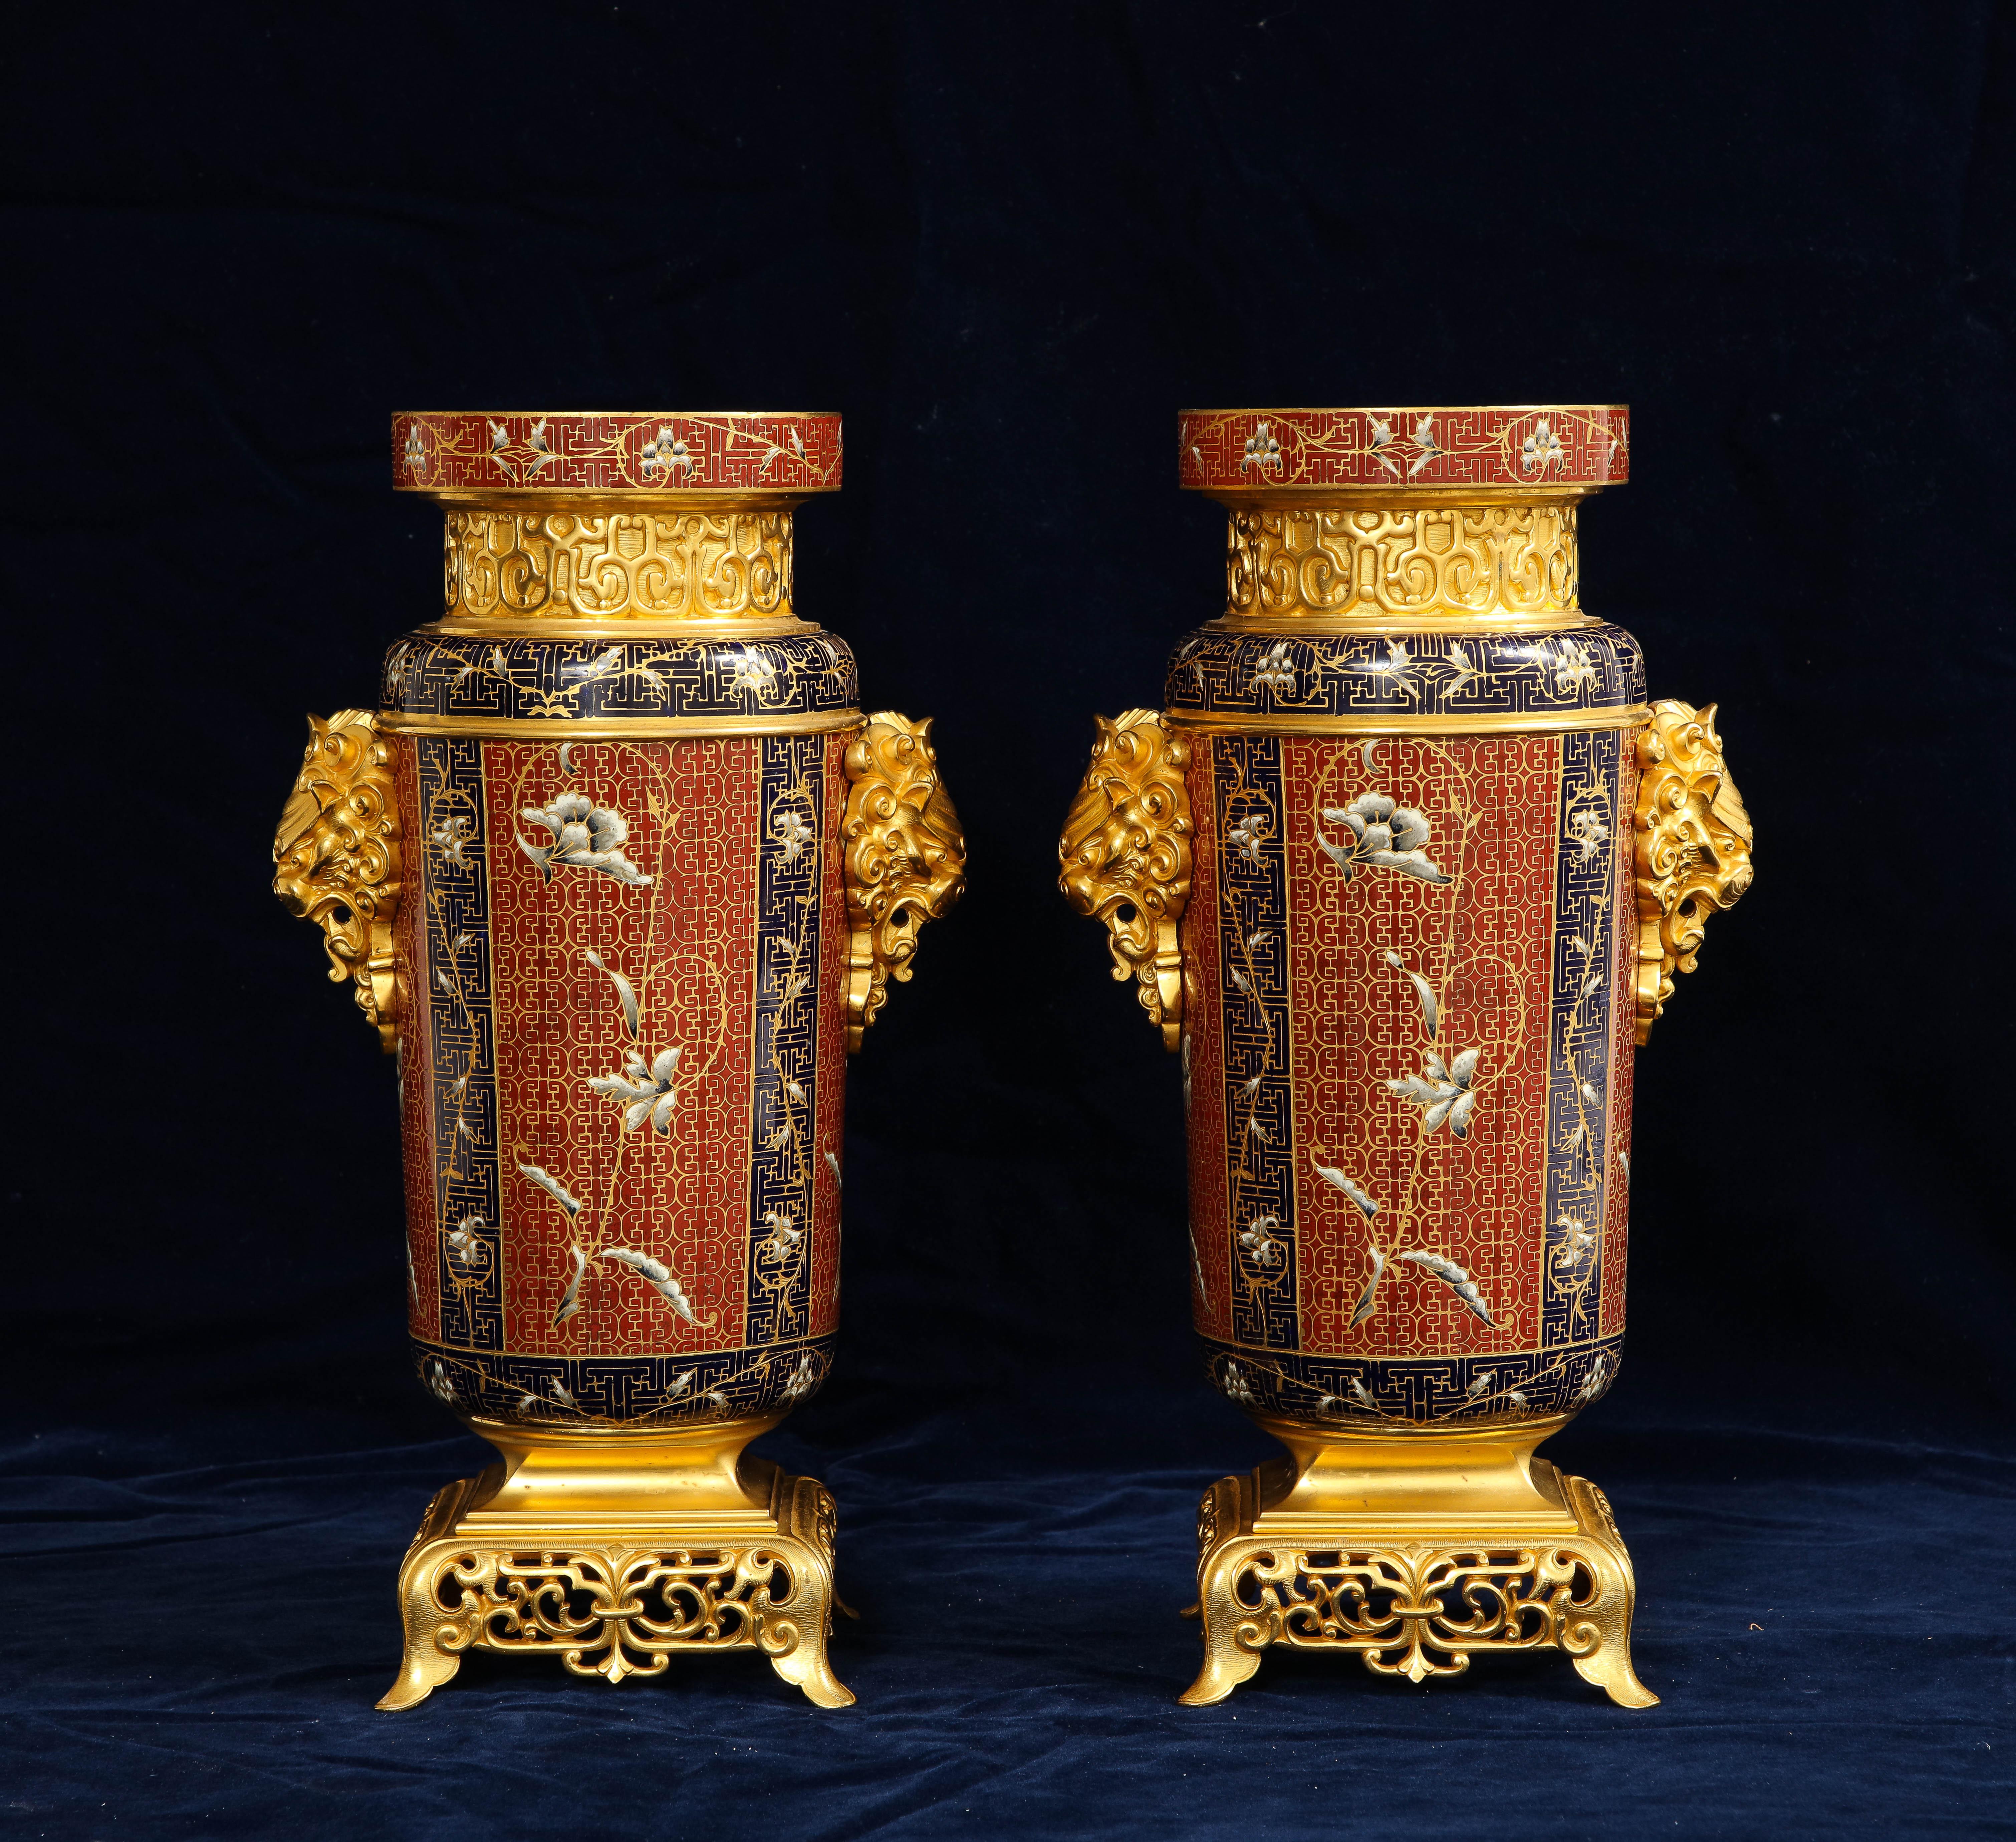 Pair of 19th C. French Ormolu and Champleve Enamel Vases with Foo Lion Handles In Good Condition For Sale In New York, NY